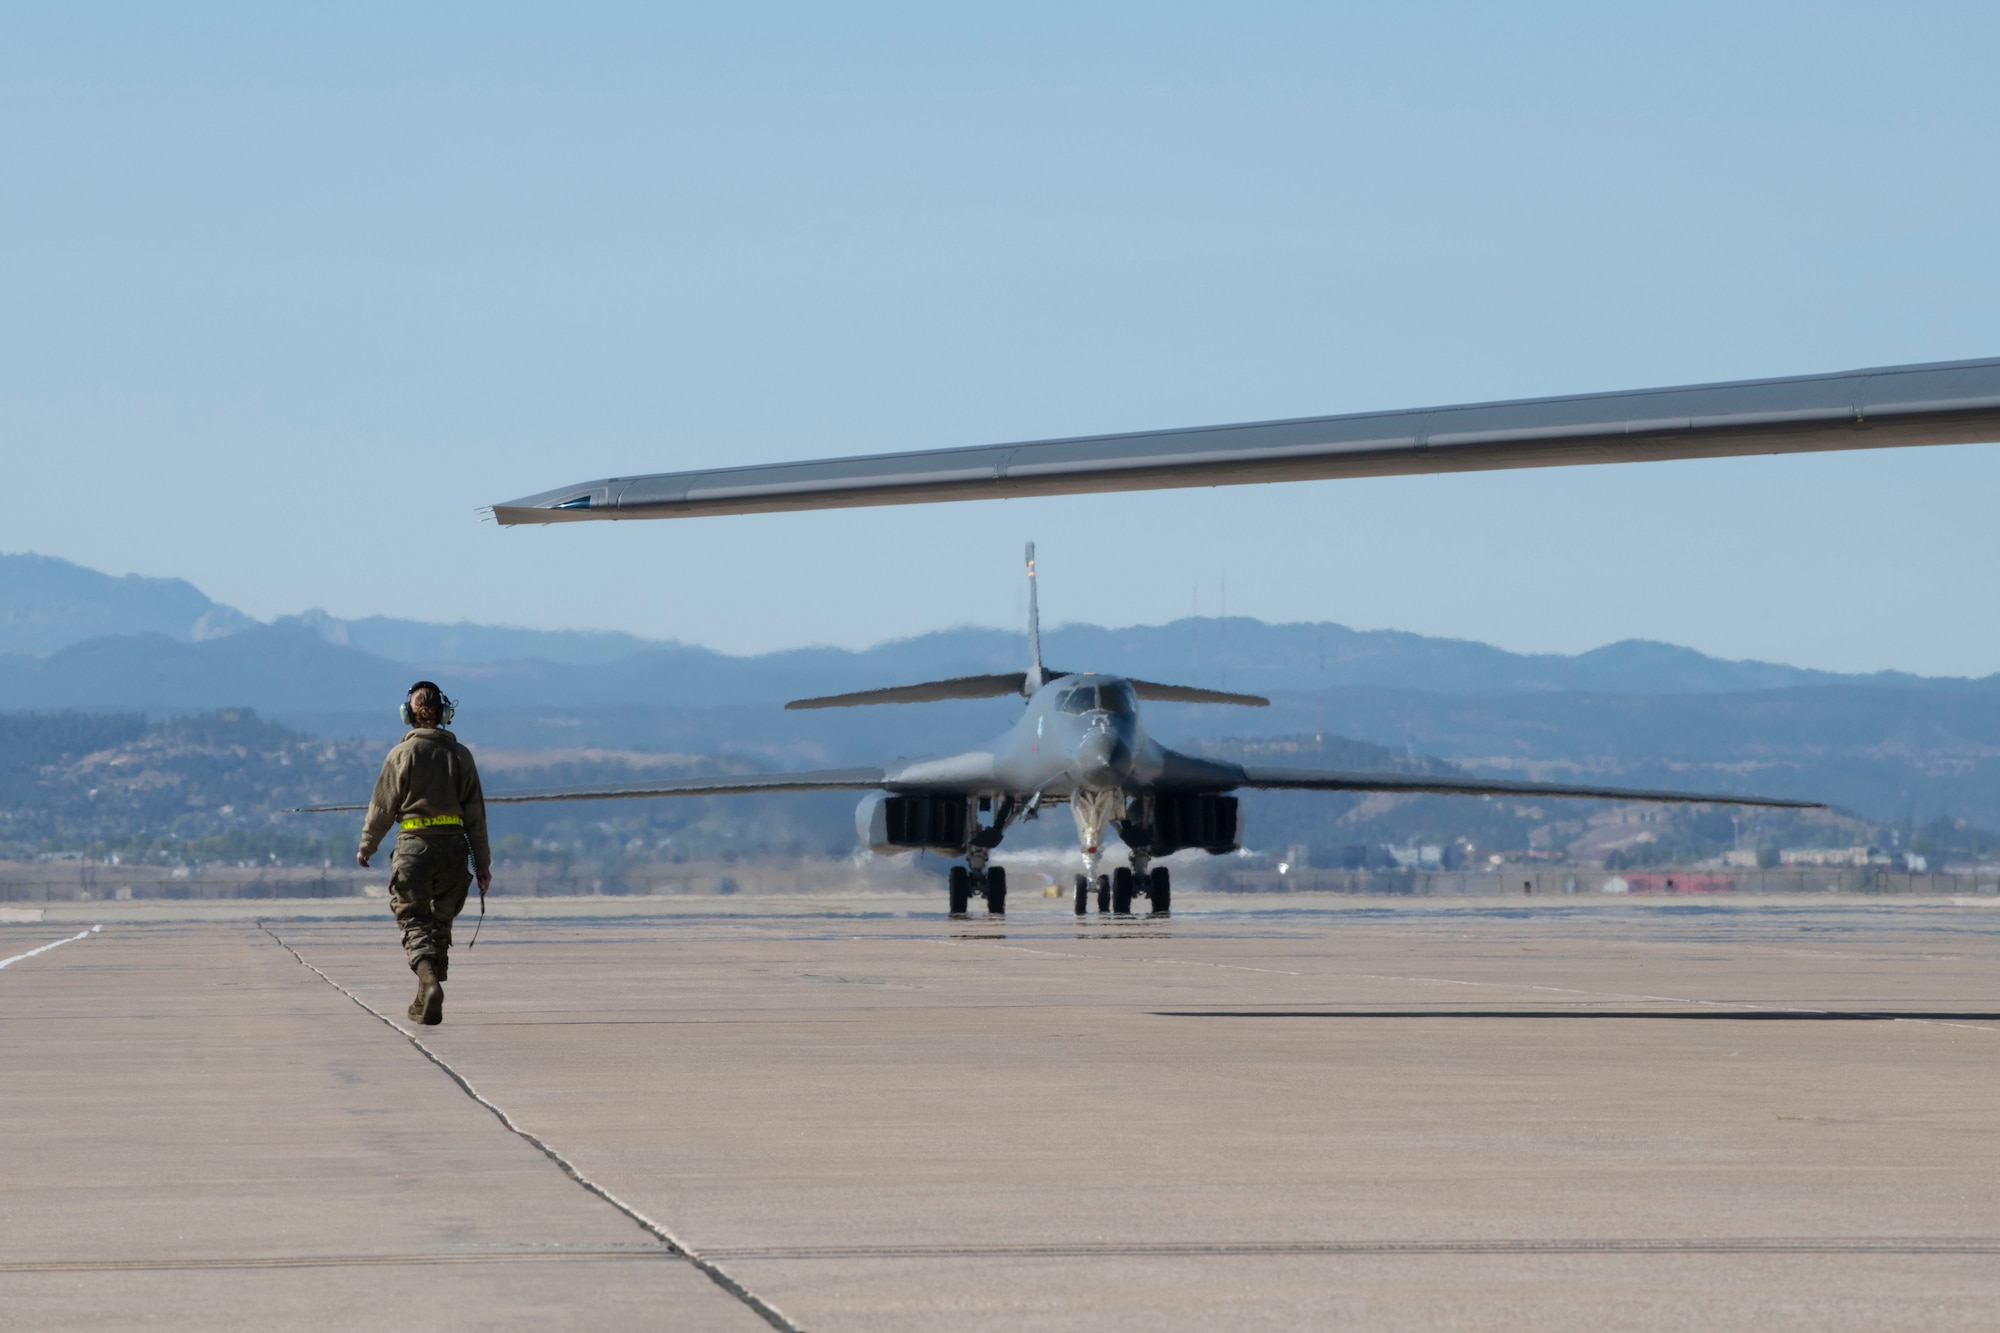 Two B-1B Lancers taxi on the runway at Ellsworth Air Force Base, S.D., after completing a Bomber Task Force deployment, Oct. 1, 2020. Bomber Task Force missions provide a persistent bomber presence in the Indo-Pacific theater and around the globe. (U.S. Air Force photo by Airman 1st Class Christina Bennett)